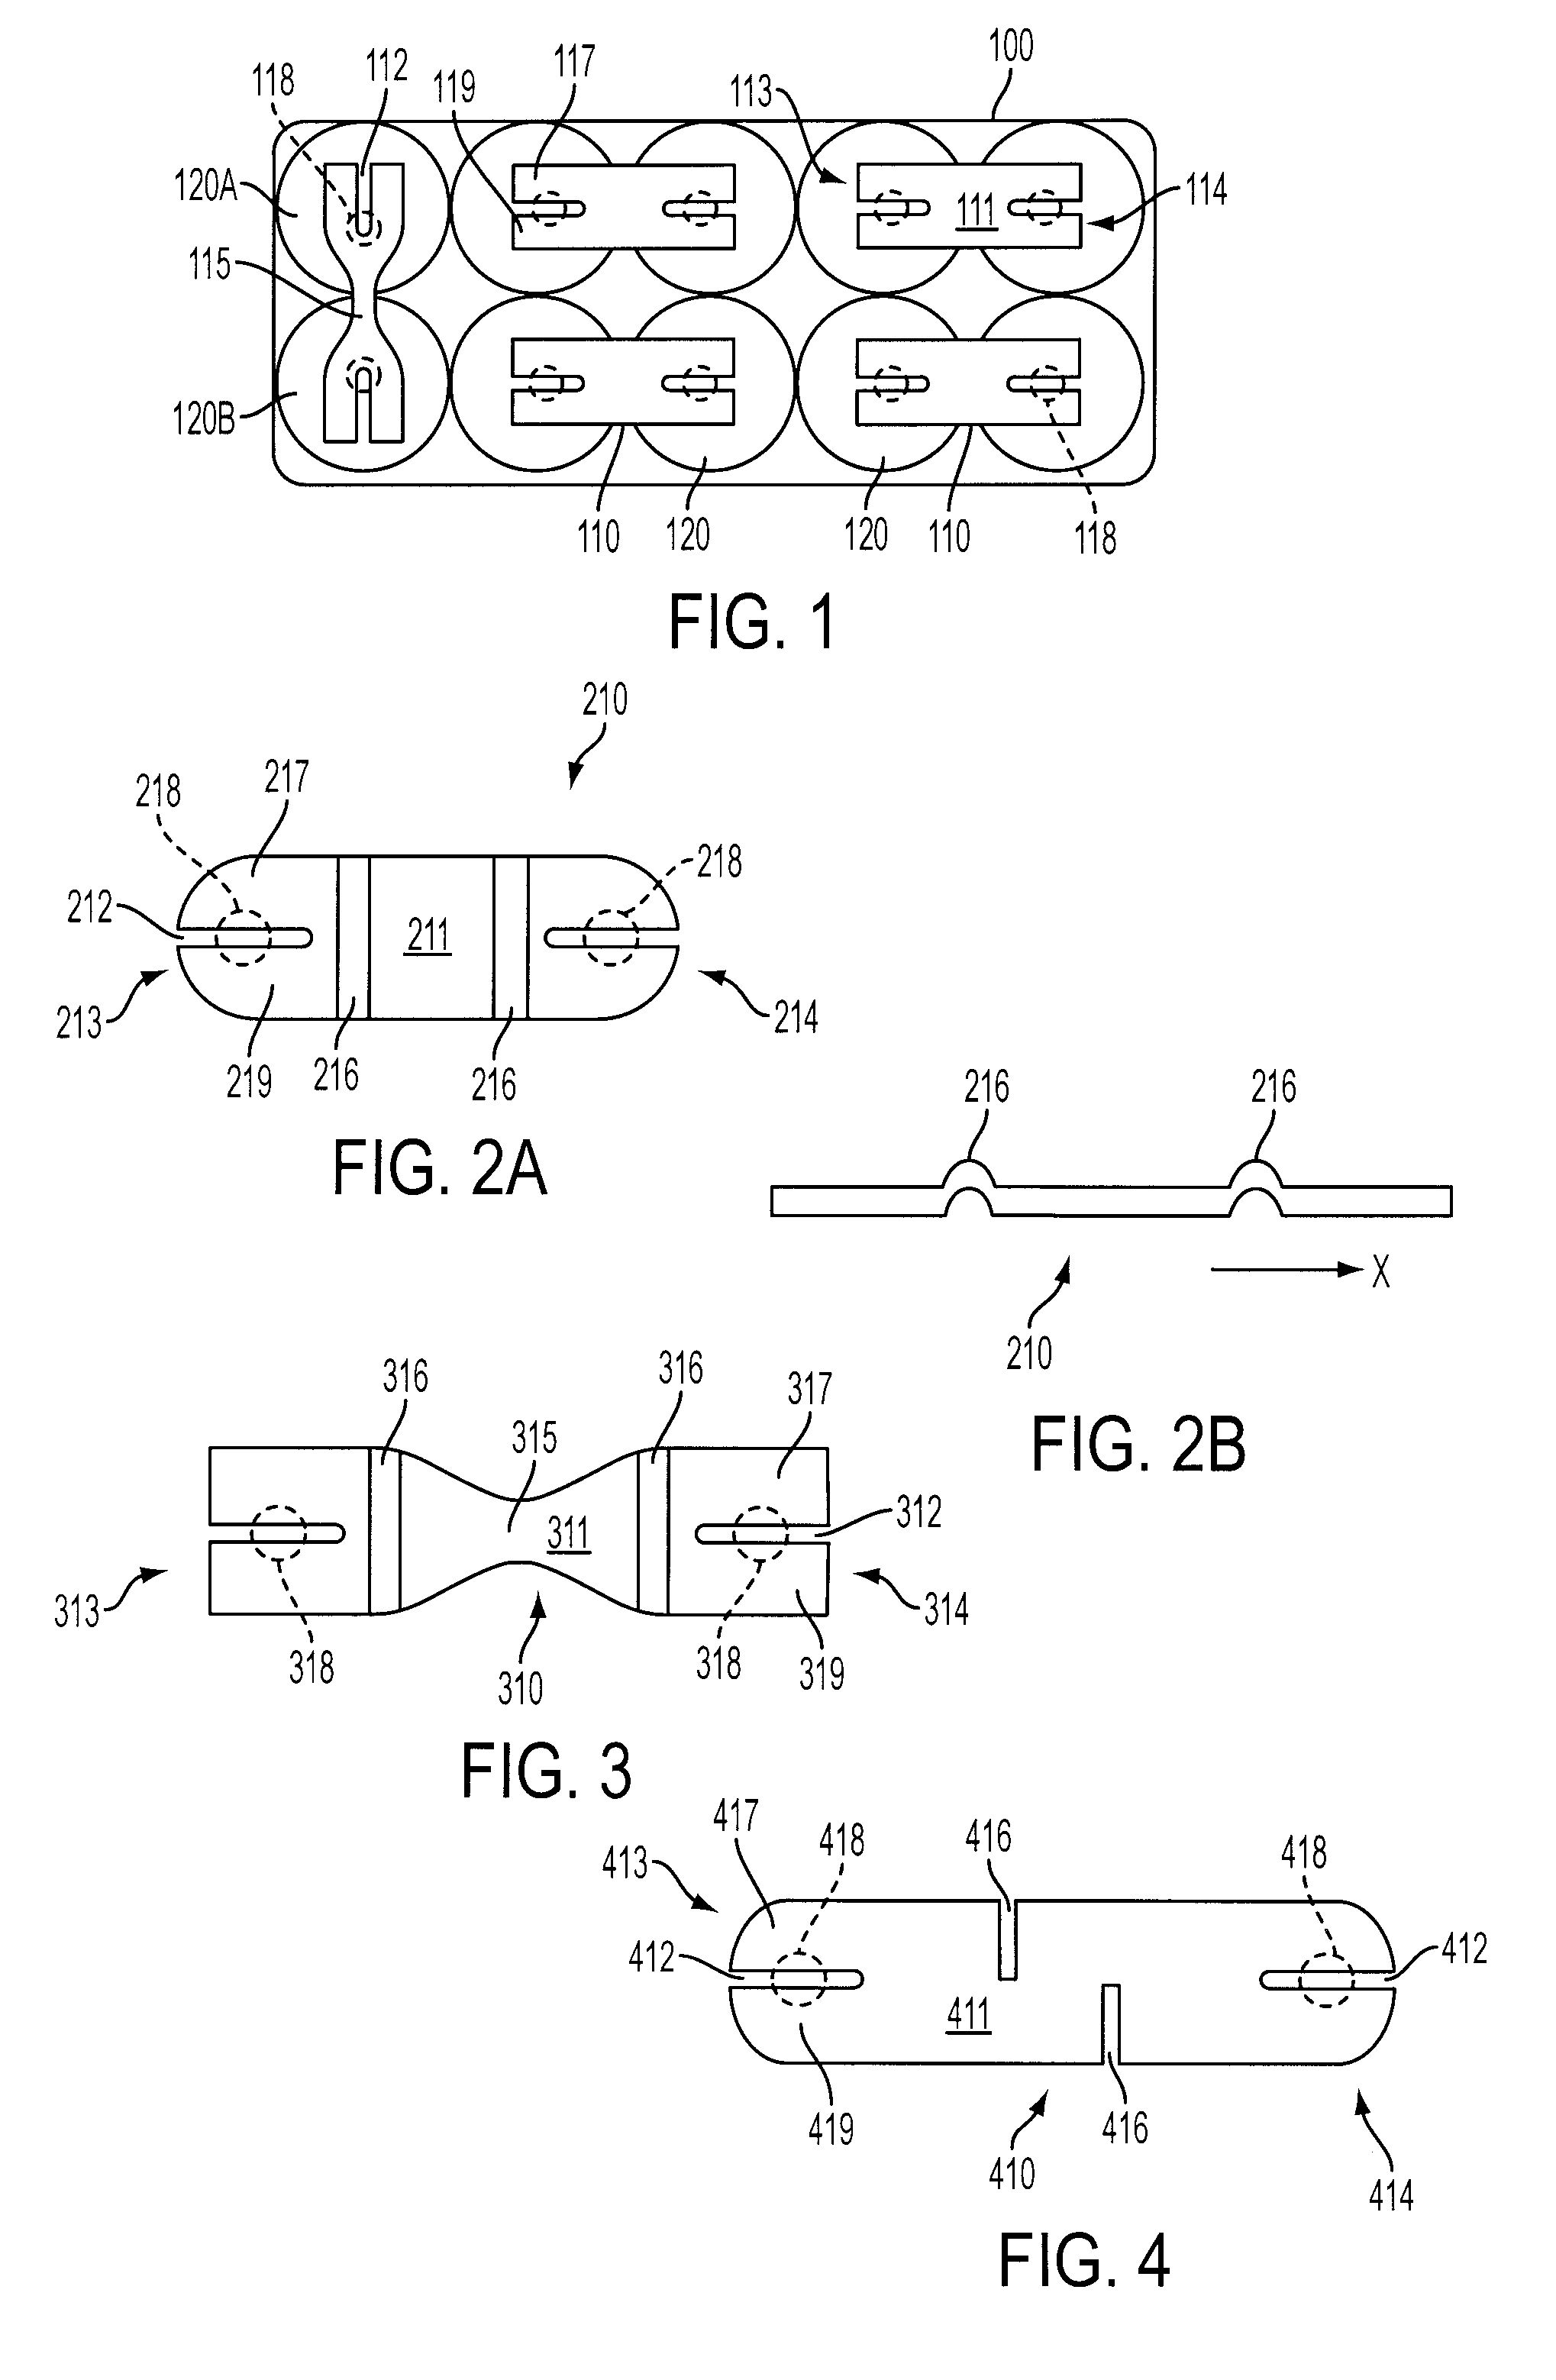 Cell connection straps for battery cells of a battery pack